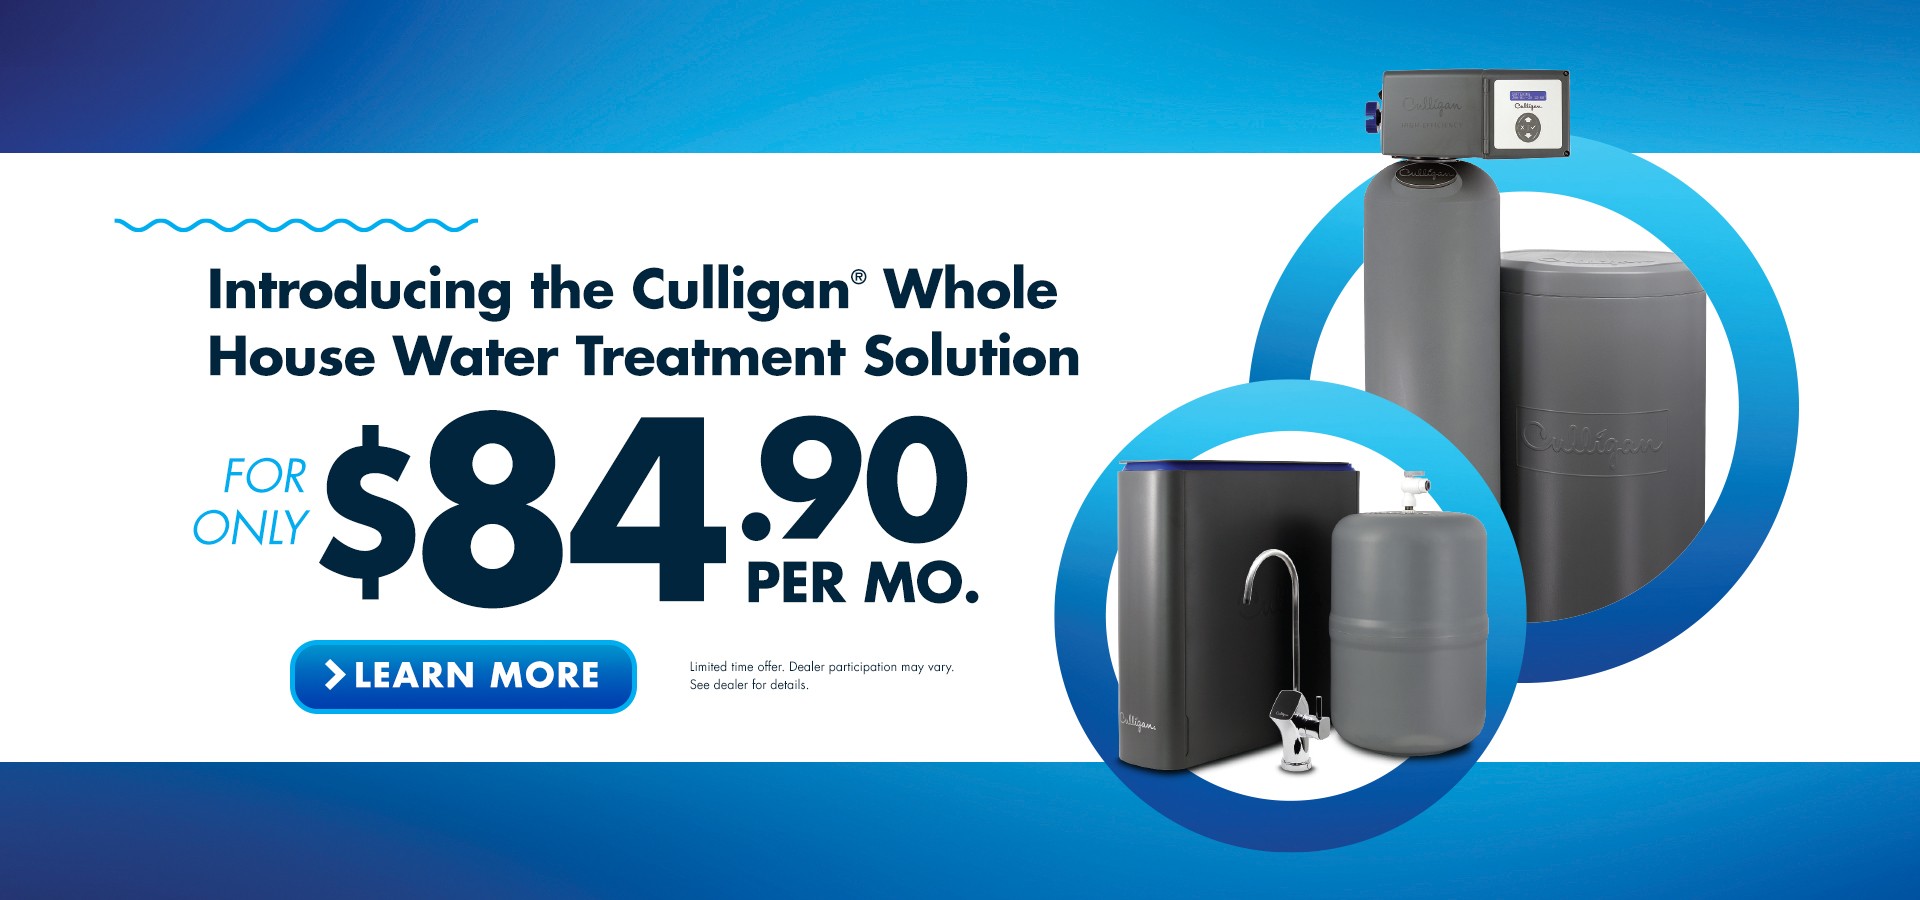 Culligan Whole House Water Treatment Solution, just $84.90/mo.